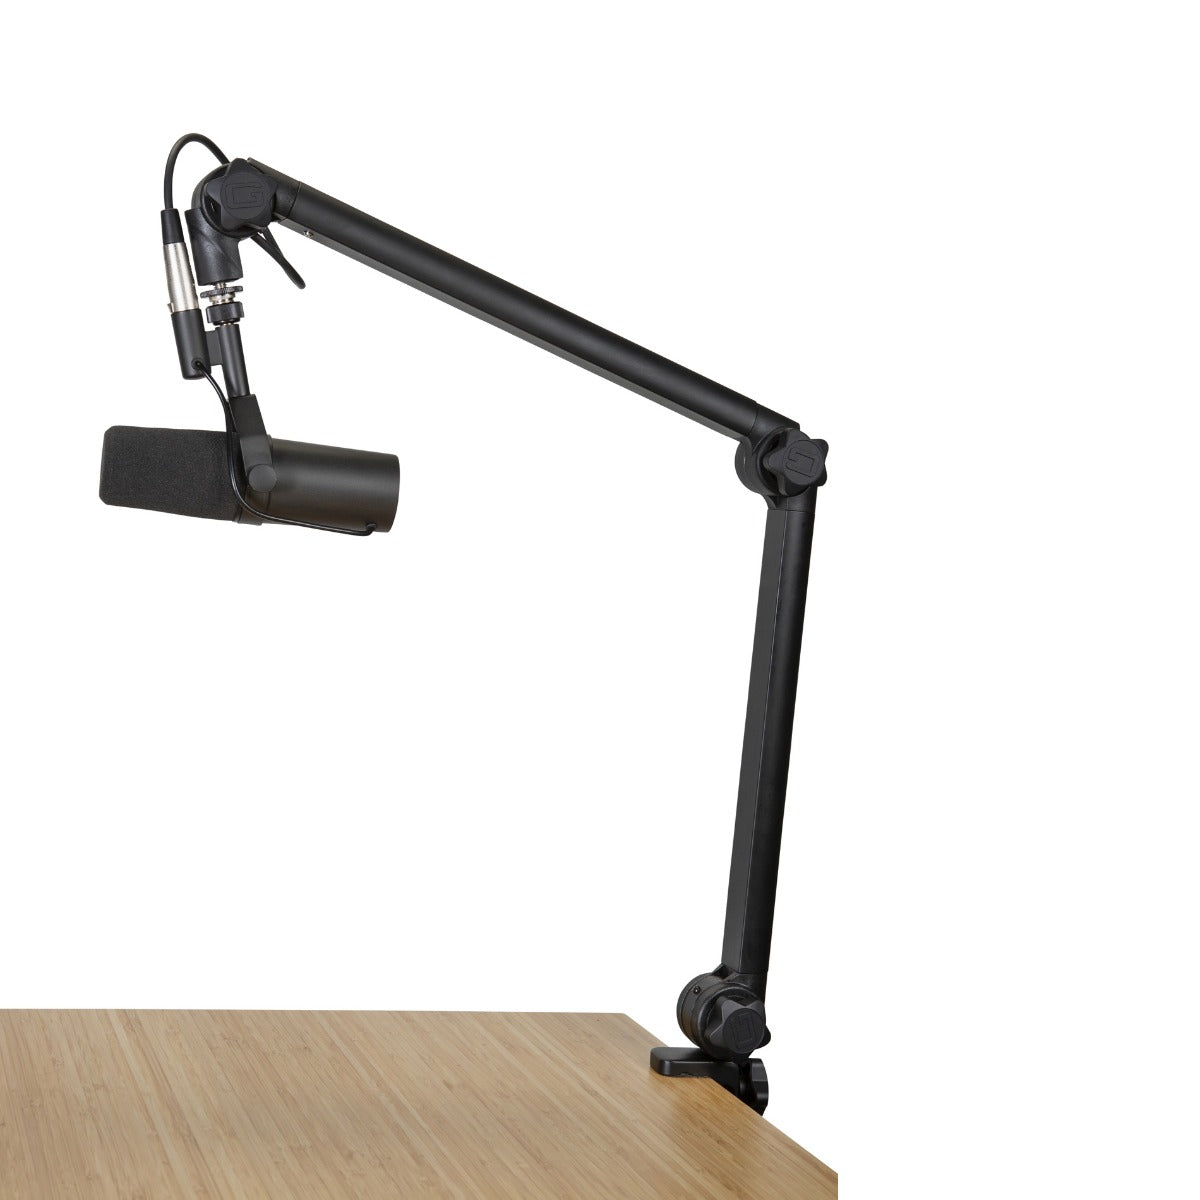 Image of the Gator Frameworks Deluxe Desktop Mic Boom Stand attached to a desk